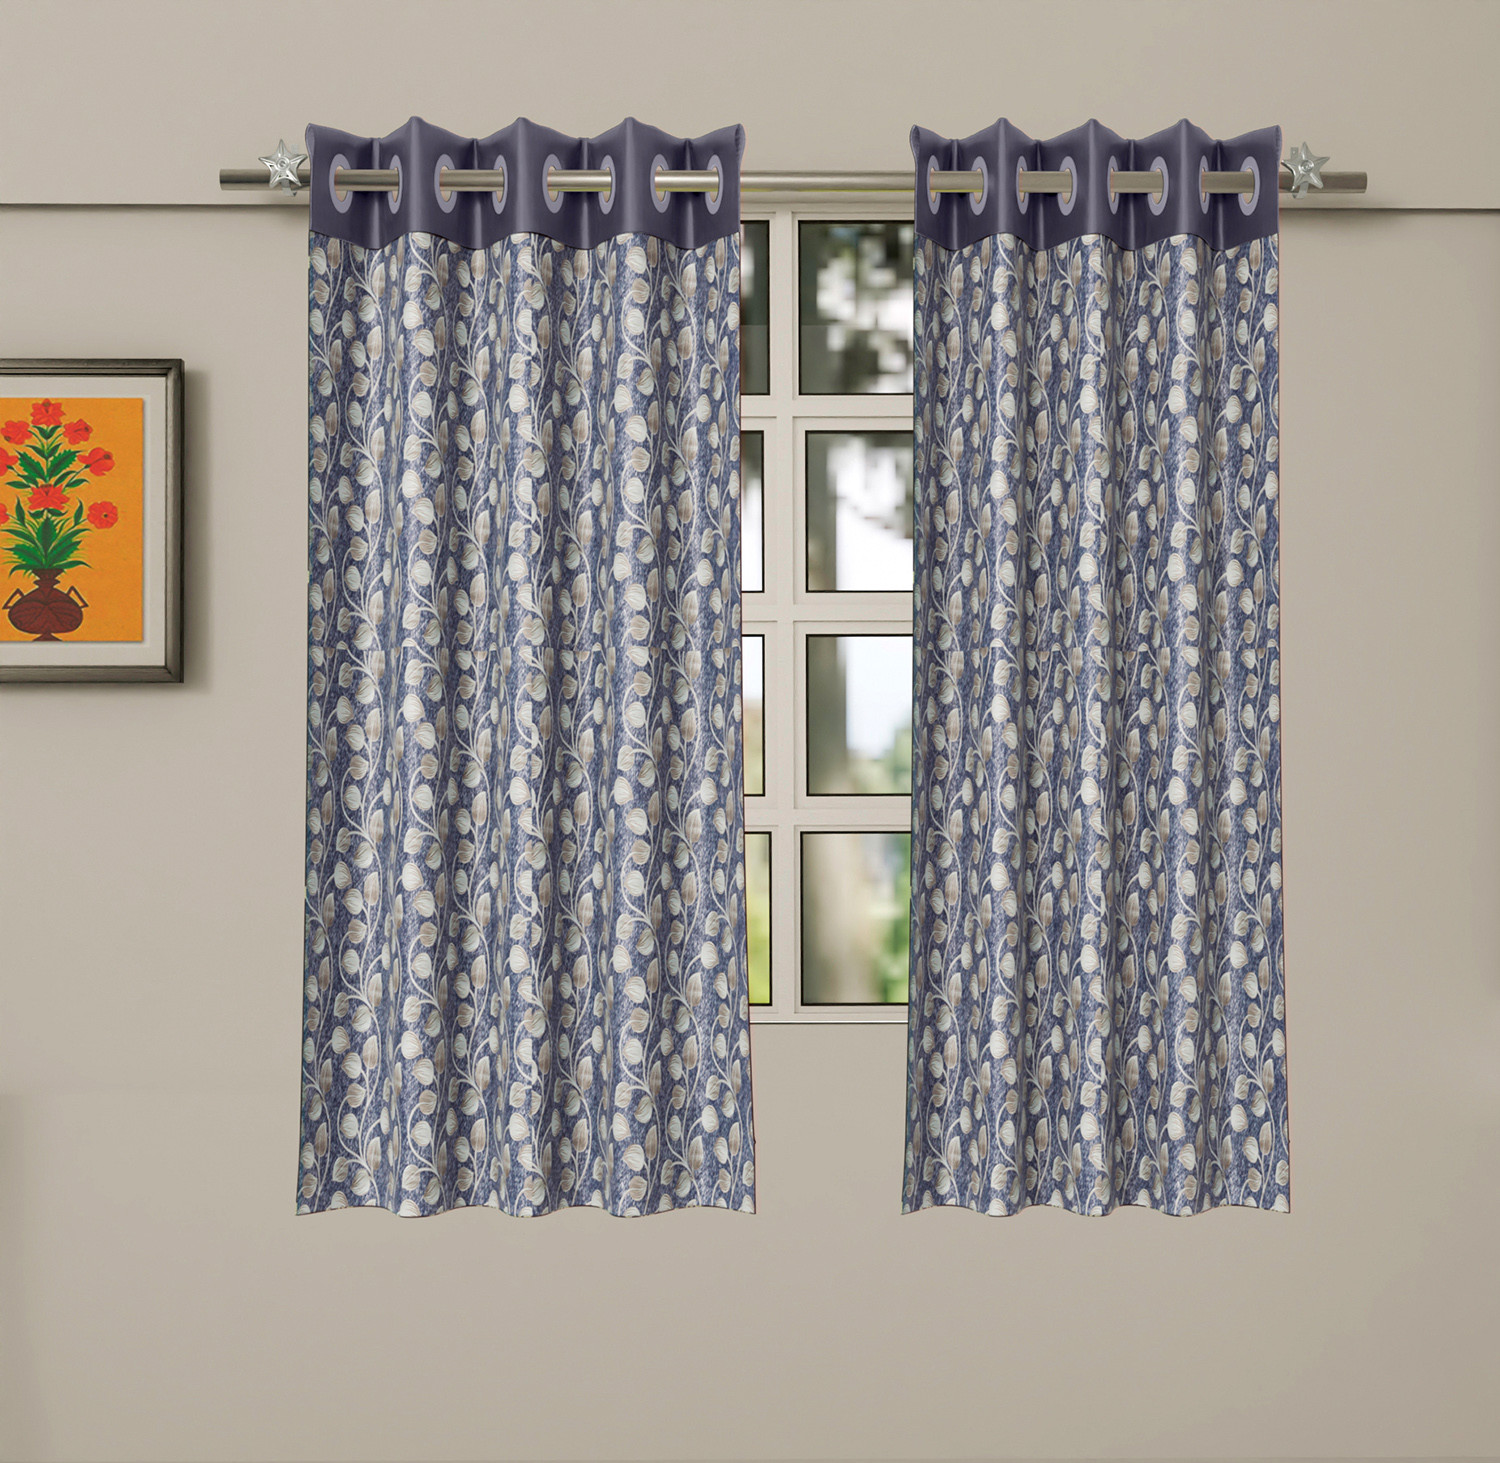 Kuber Industries Silk Decorative 5 Feet Window Curtain | Leaf Print Darkening Blackout | Drapes Curtain With 8 Eyelet For Home & Office (Blue)